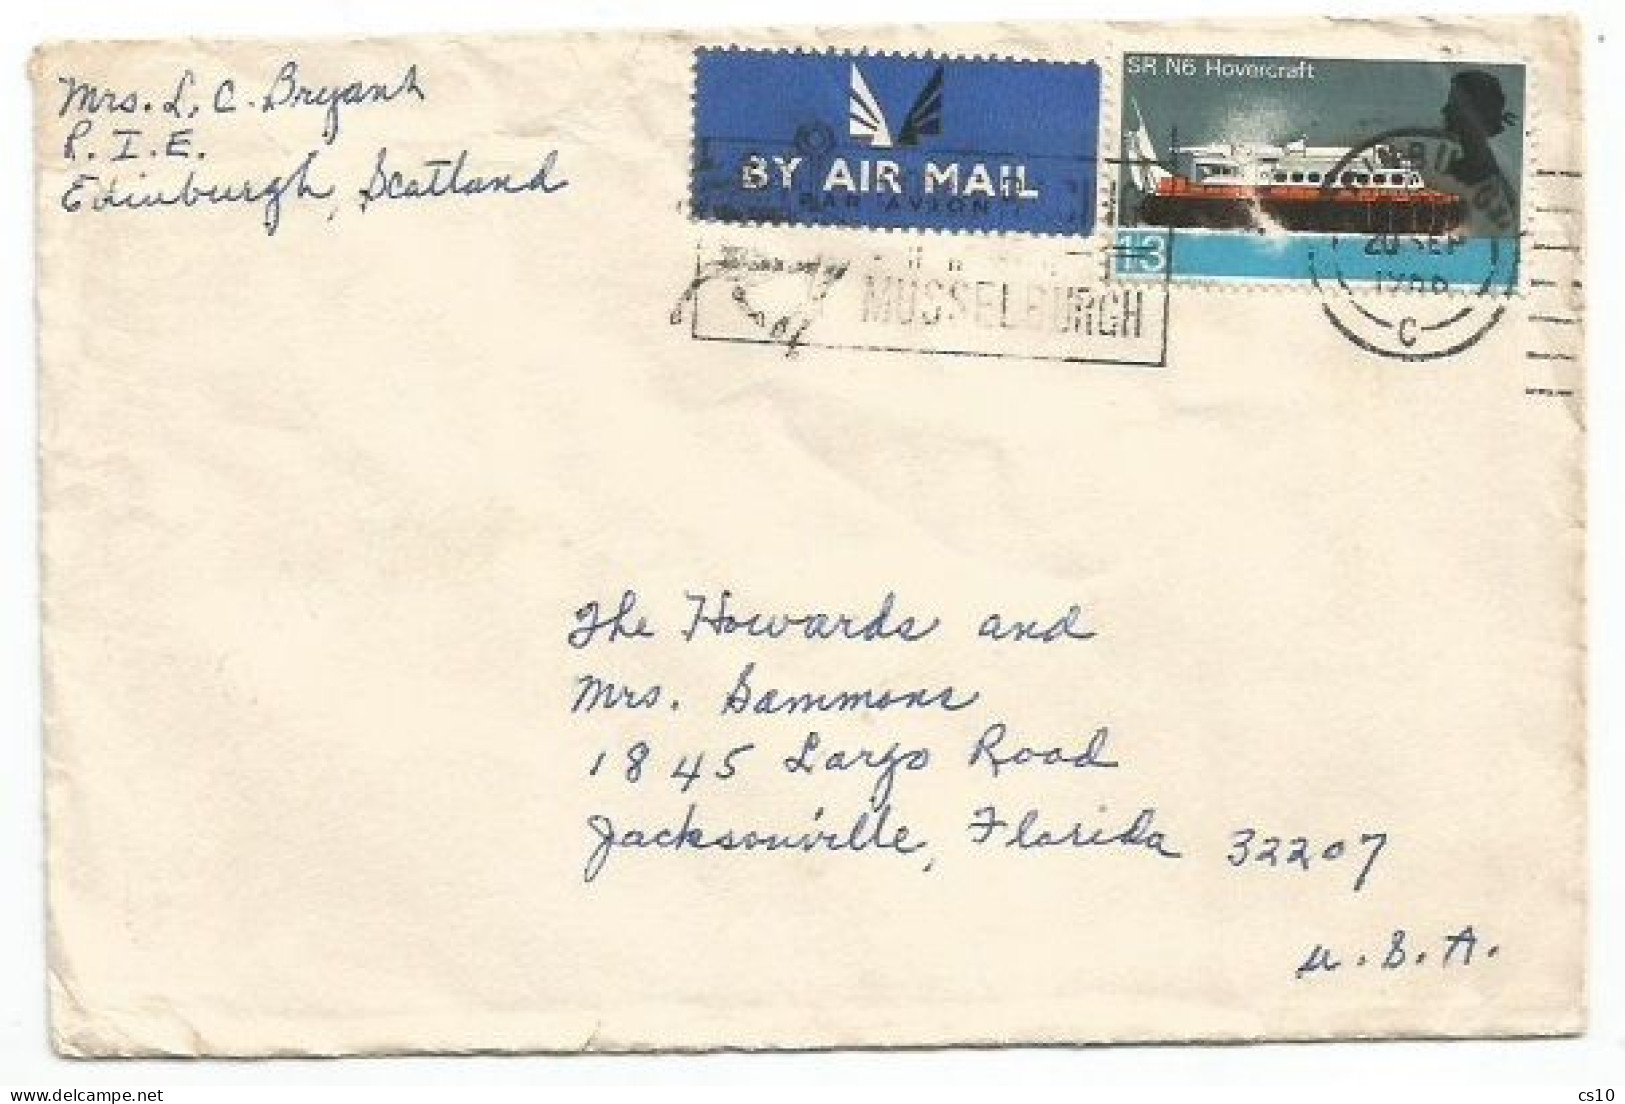 UK Britain AirmailCV Edimburgh 20sep1966 To USA With Hovercraft 1S3 Solo Franking - Postmark Collection